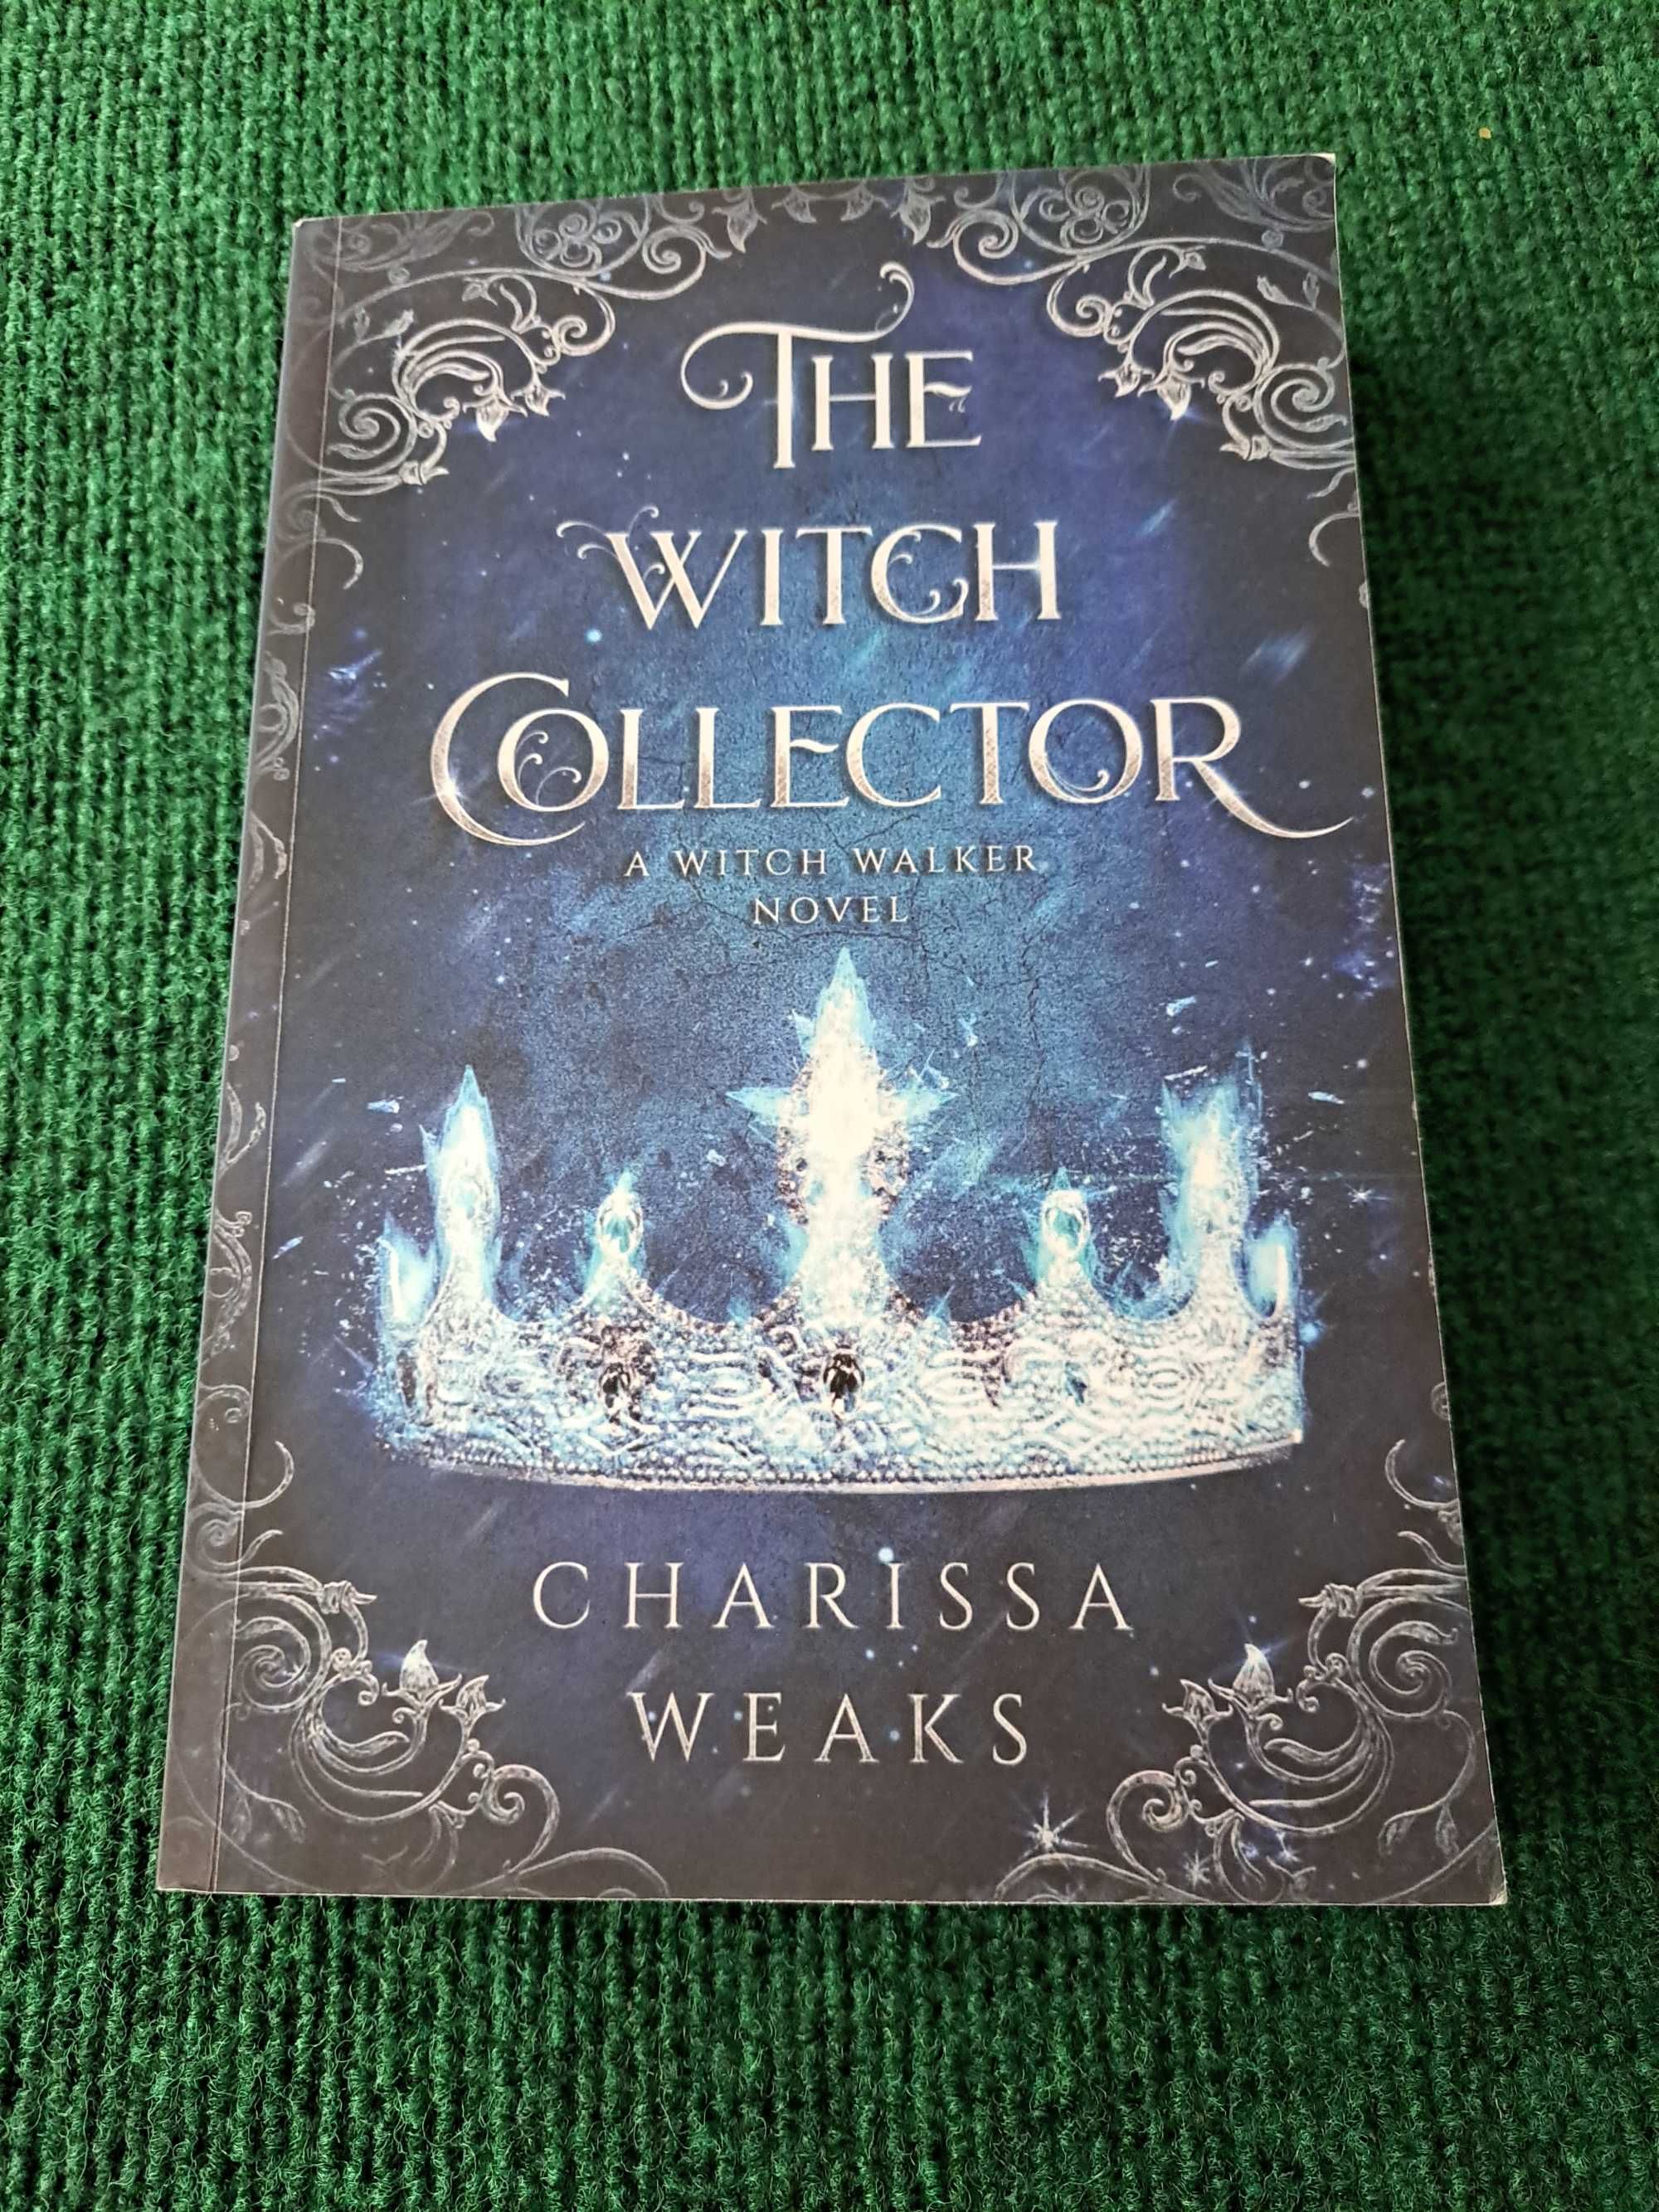 The Witch Collector - A Witch Walker Novel - Charissa Weaks